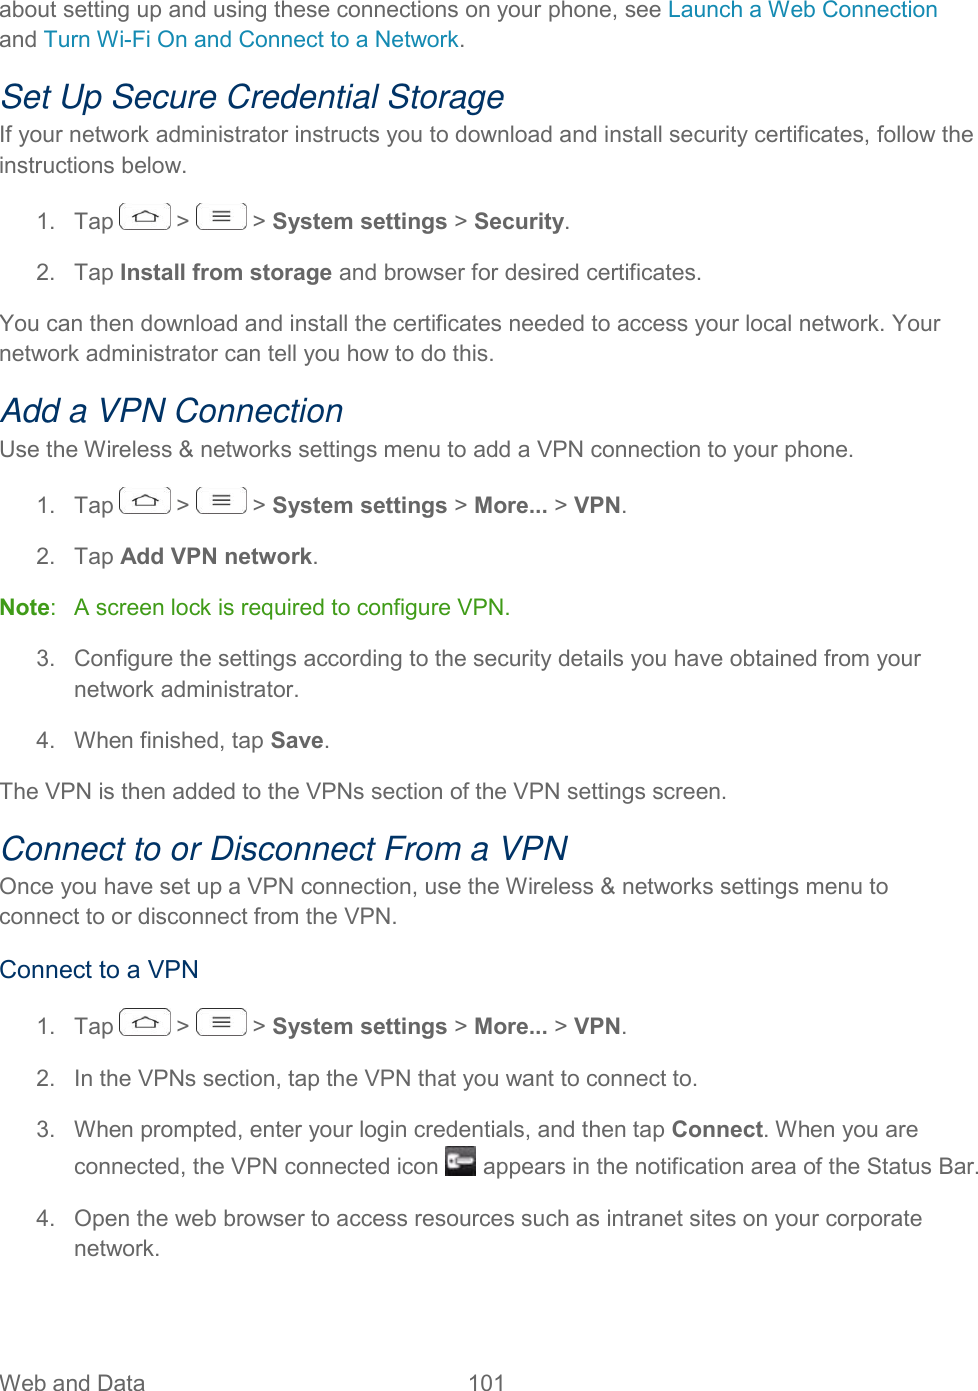  Web and Data  101   about setting up and using these connections on your phone, see Launch a Web Connection and Turn Wi-Fi On and Connect to a Network. Set Up Secure Credential Storage If your network administrator instructs you to download and install security certificates, follow the instructions below. 1.  Tap   &gt;   &gt; System settings &gt; Security. 2.  Tap Install from storage and browser for desired certificates. You can then download and install the certificates needed to access your local network. Your network administrator can tell you how to do this. Add a VPN Connection Use the Wireless &amp; networks settings menu to add a VPN connection to your phone. 1.  Tap   &gt;   &gt; System settings &gt; More... &gt; VPN. 2.  Tap Add VPN network. Note:   A screen lock is required to configure VPN. 3.  Configure the settings according to the security details you have obtained from your network administrator. 4.  When finished, tap Save. The VPN is then added to the VPNs section of the VPN settings screen. Connect to or Disconnect From a VPN Once you have set up a VPN connection, use the Wireless &amp; networks settings menu to connect to or disconnect from the VPN. Connect to a VPN 1.  Tap   &gt;   &gt; System settings &gt; More... &gt; VPN. 2.  In the VPNs section, tap the VPN that you want to connect to. 3.  When prompted, enter your login credentials, and then tap Connect. When you are connected, the VPN connected icon   appears in the notification area of the Status Bar. 4.  Open the web browser to access resources such as intranet sites on your corporate network. 